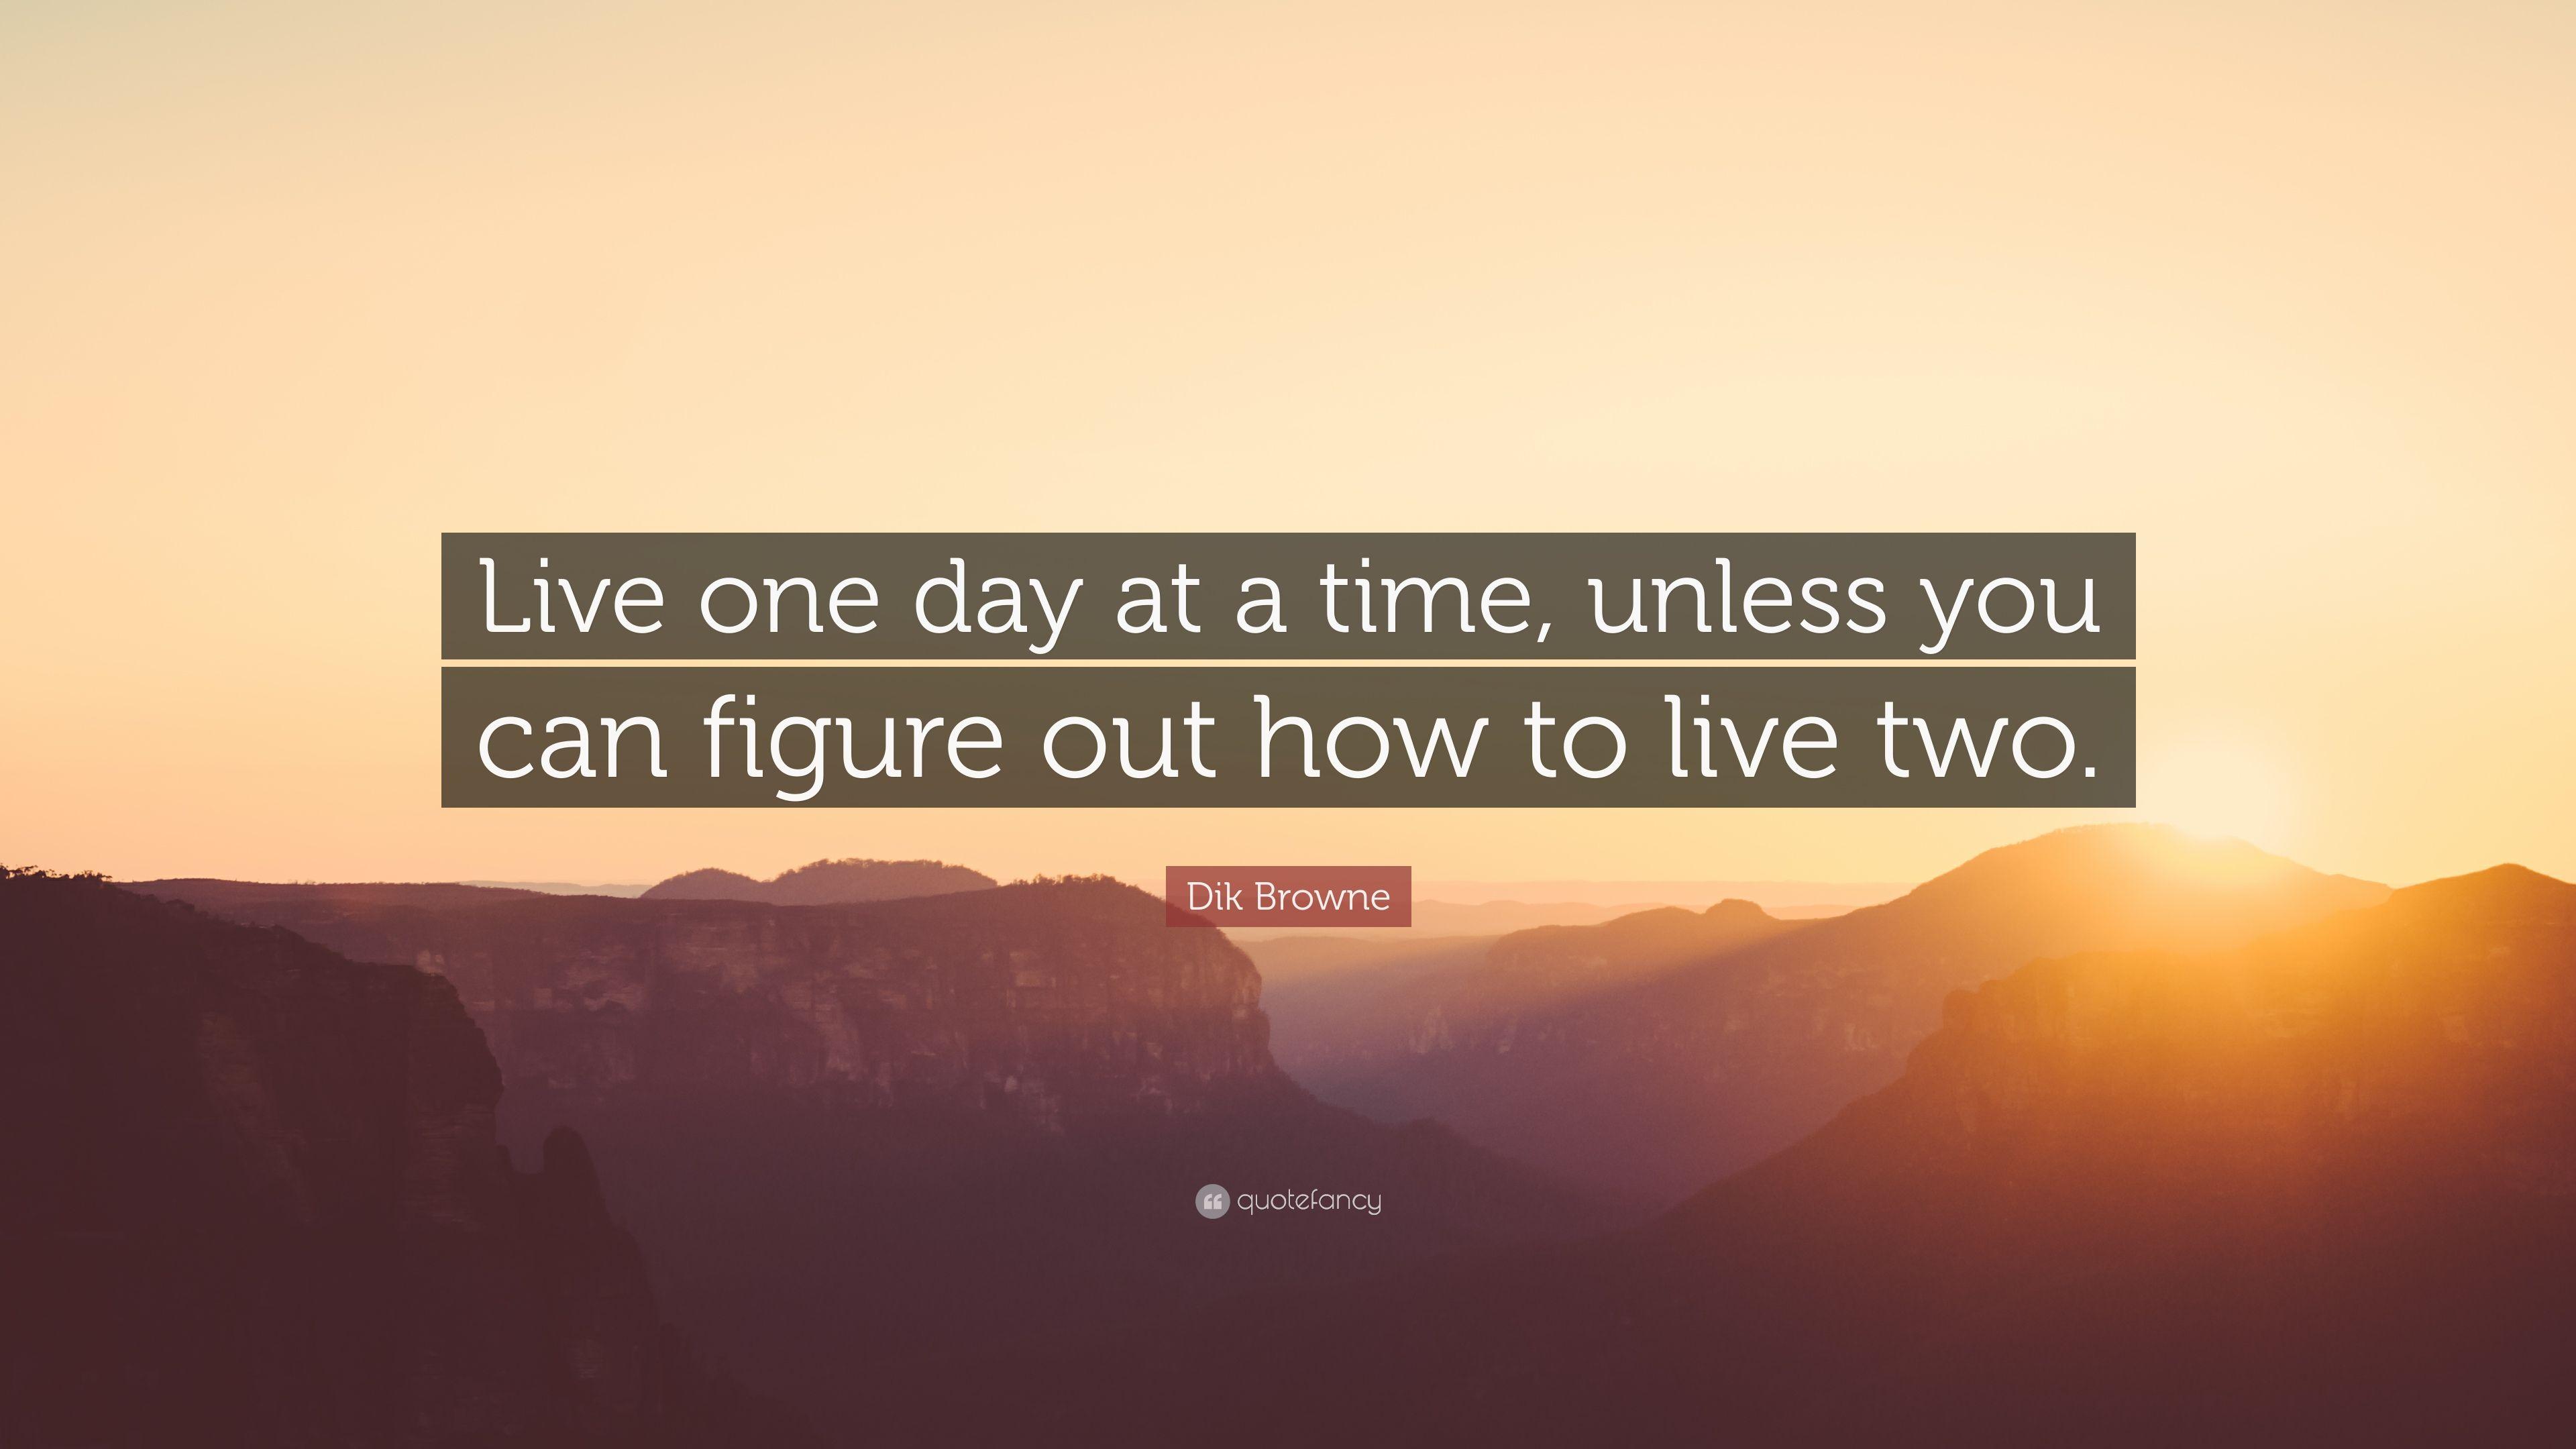 Dik Browne Quote: “Live one day at a time, unless you can figure